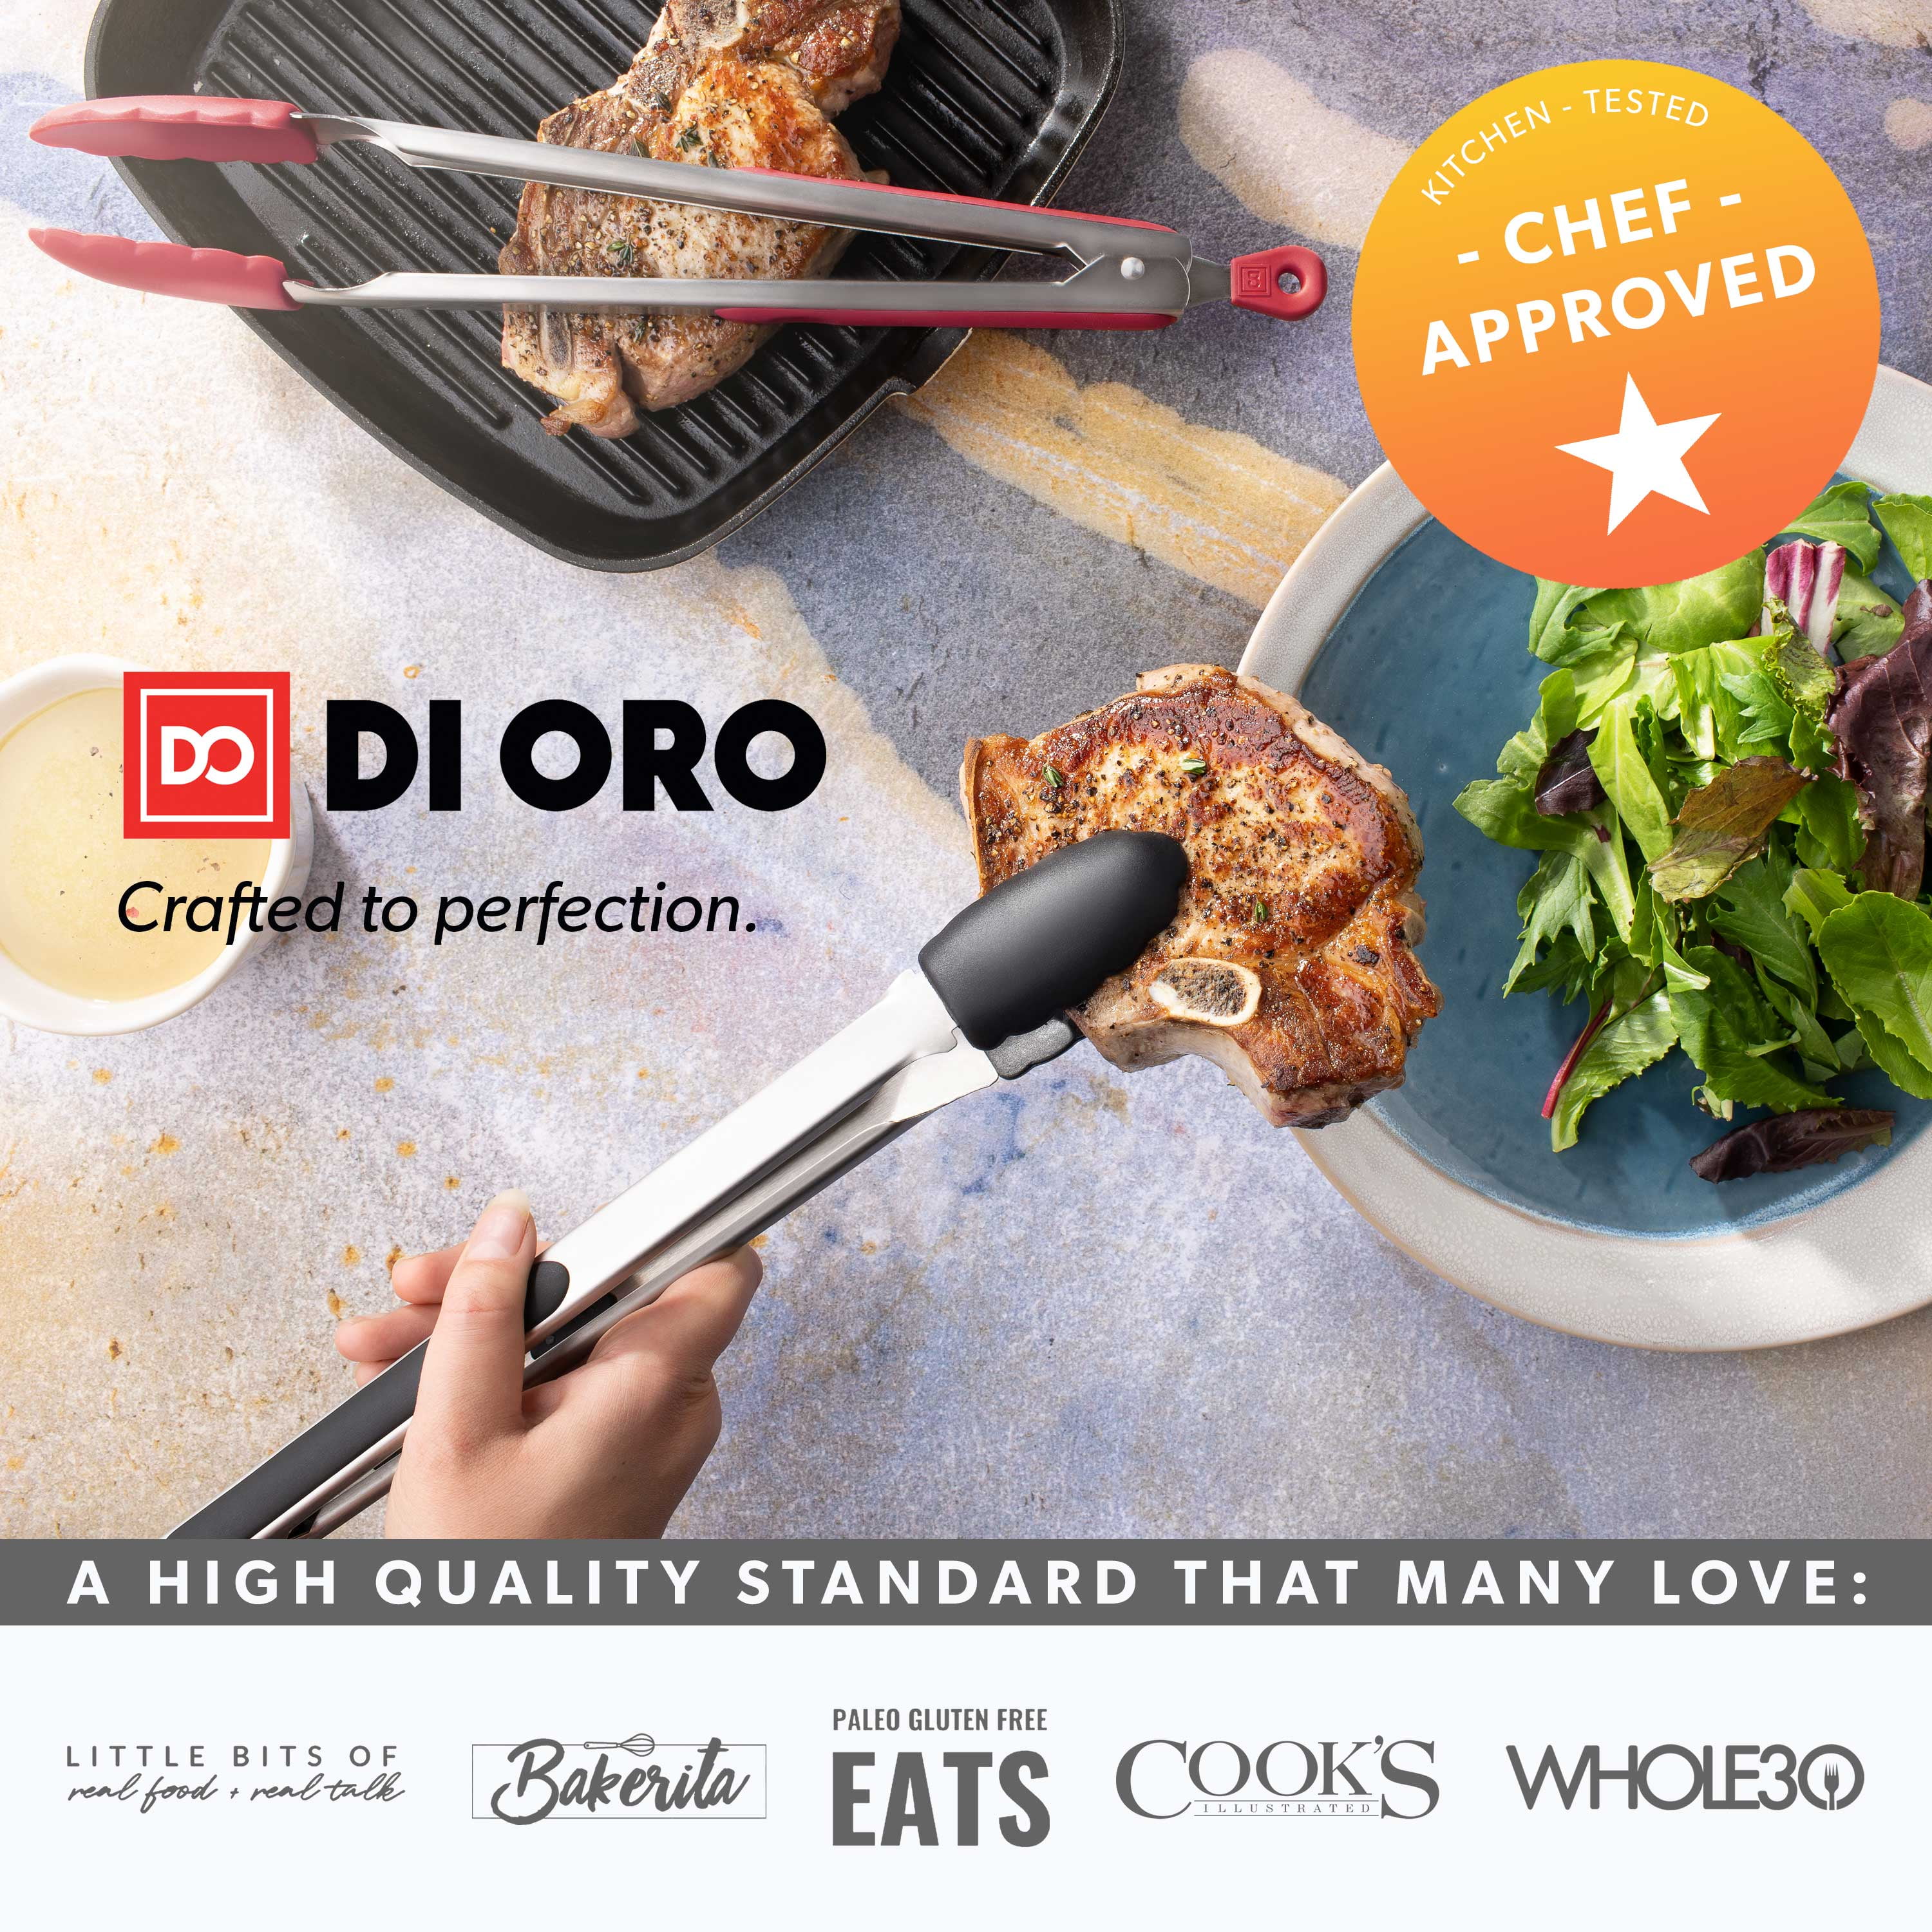 Serving Dishwasher Safe and Easy to Clean Black and Barbecuing New DI ORO 12-Inch Kitchen Tongs – Stainless Steel with Non-Stick 480F Heat-Resistant BPA Free Silicone Tips – Great Tool for Cooking